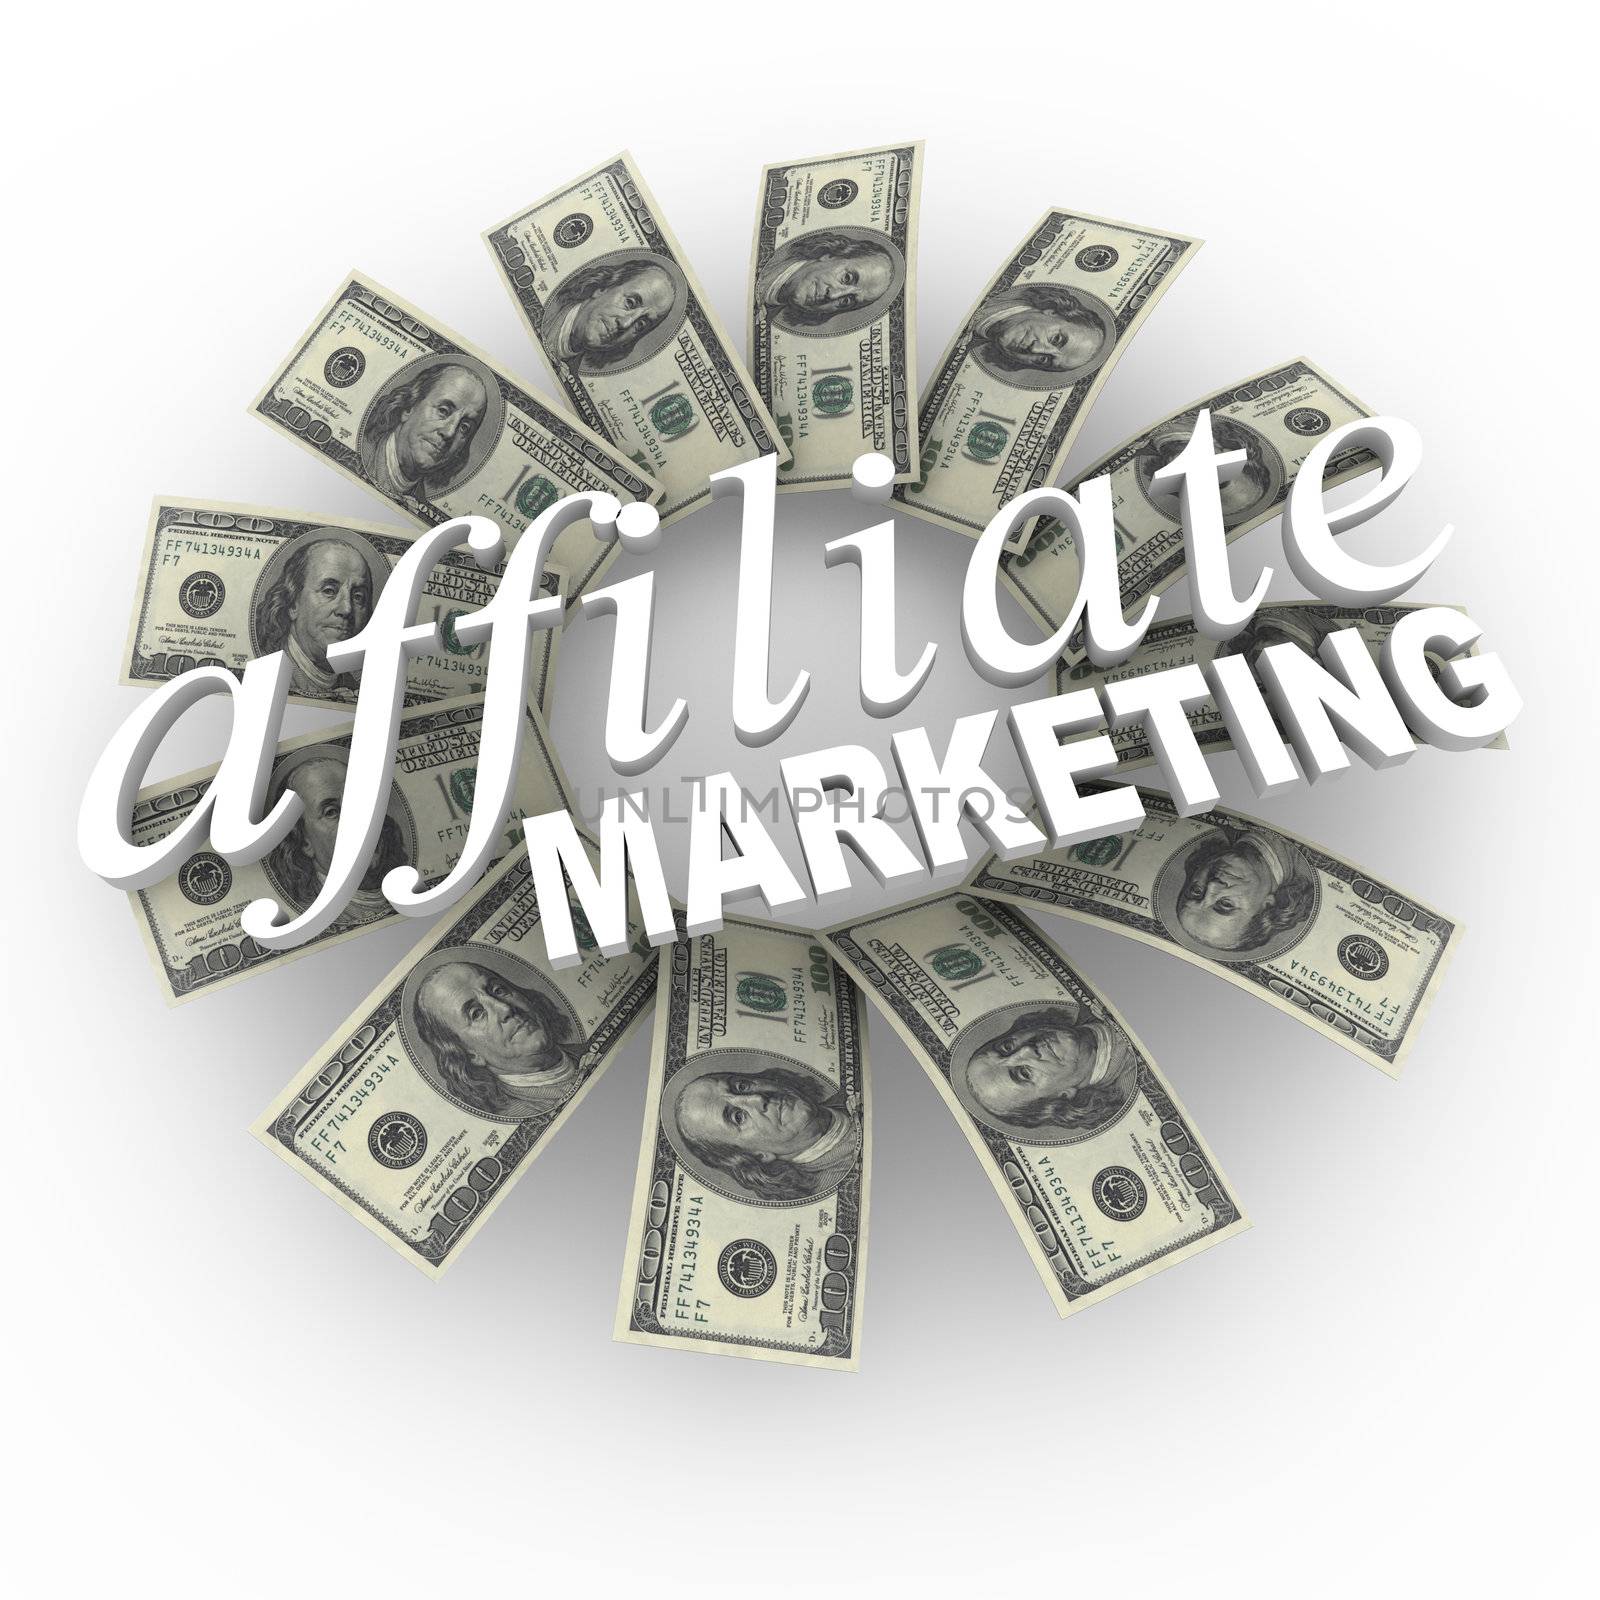 The words Affiliate Marketing against a circular patterned backdrop of hundred dollar bills representing the network referral scheme to collect money through connections of affiliates and partners